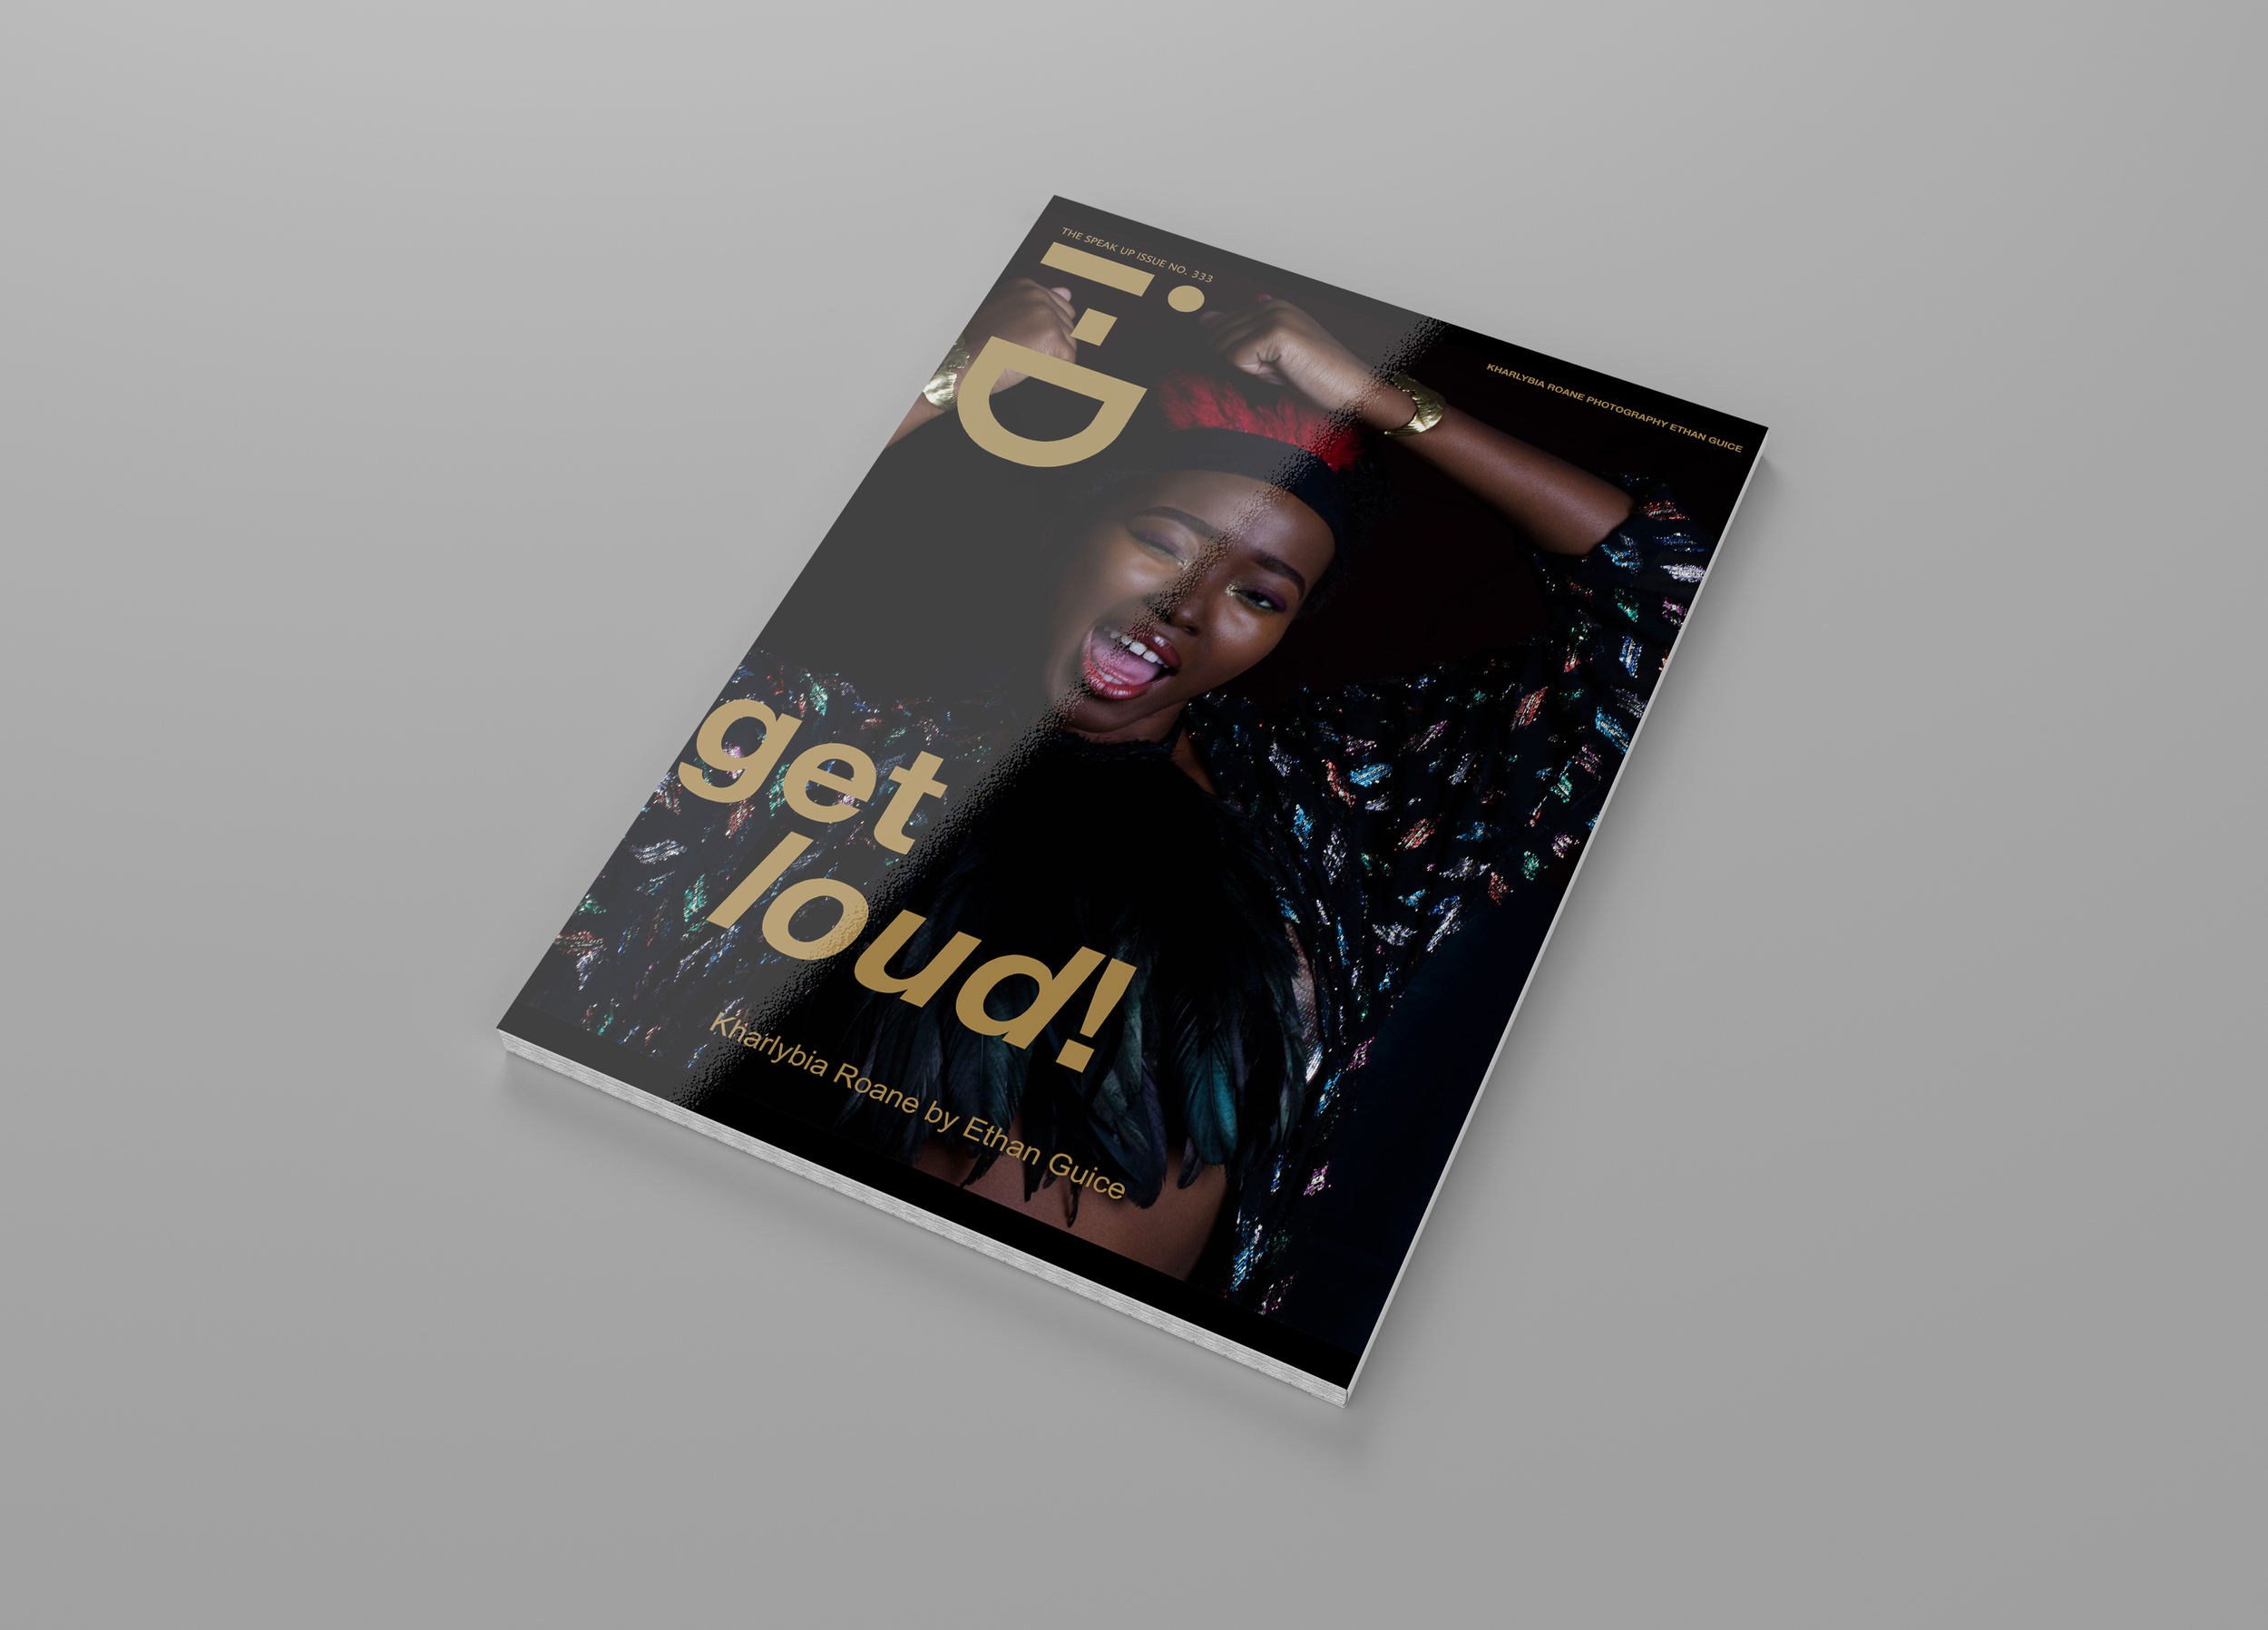   This is a mock i-D magazine created as a project for the class Current Trends and Forecasting at the Savannah College of Art and Design. The purpose of this project was to create a magazine showing current trends within the fashion industry whilst 